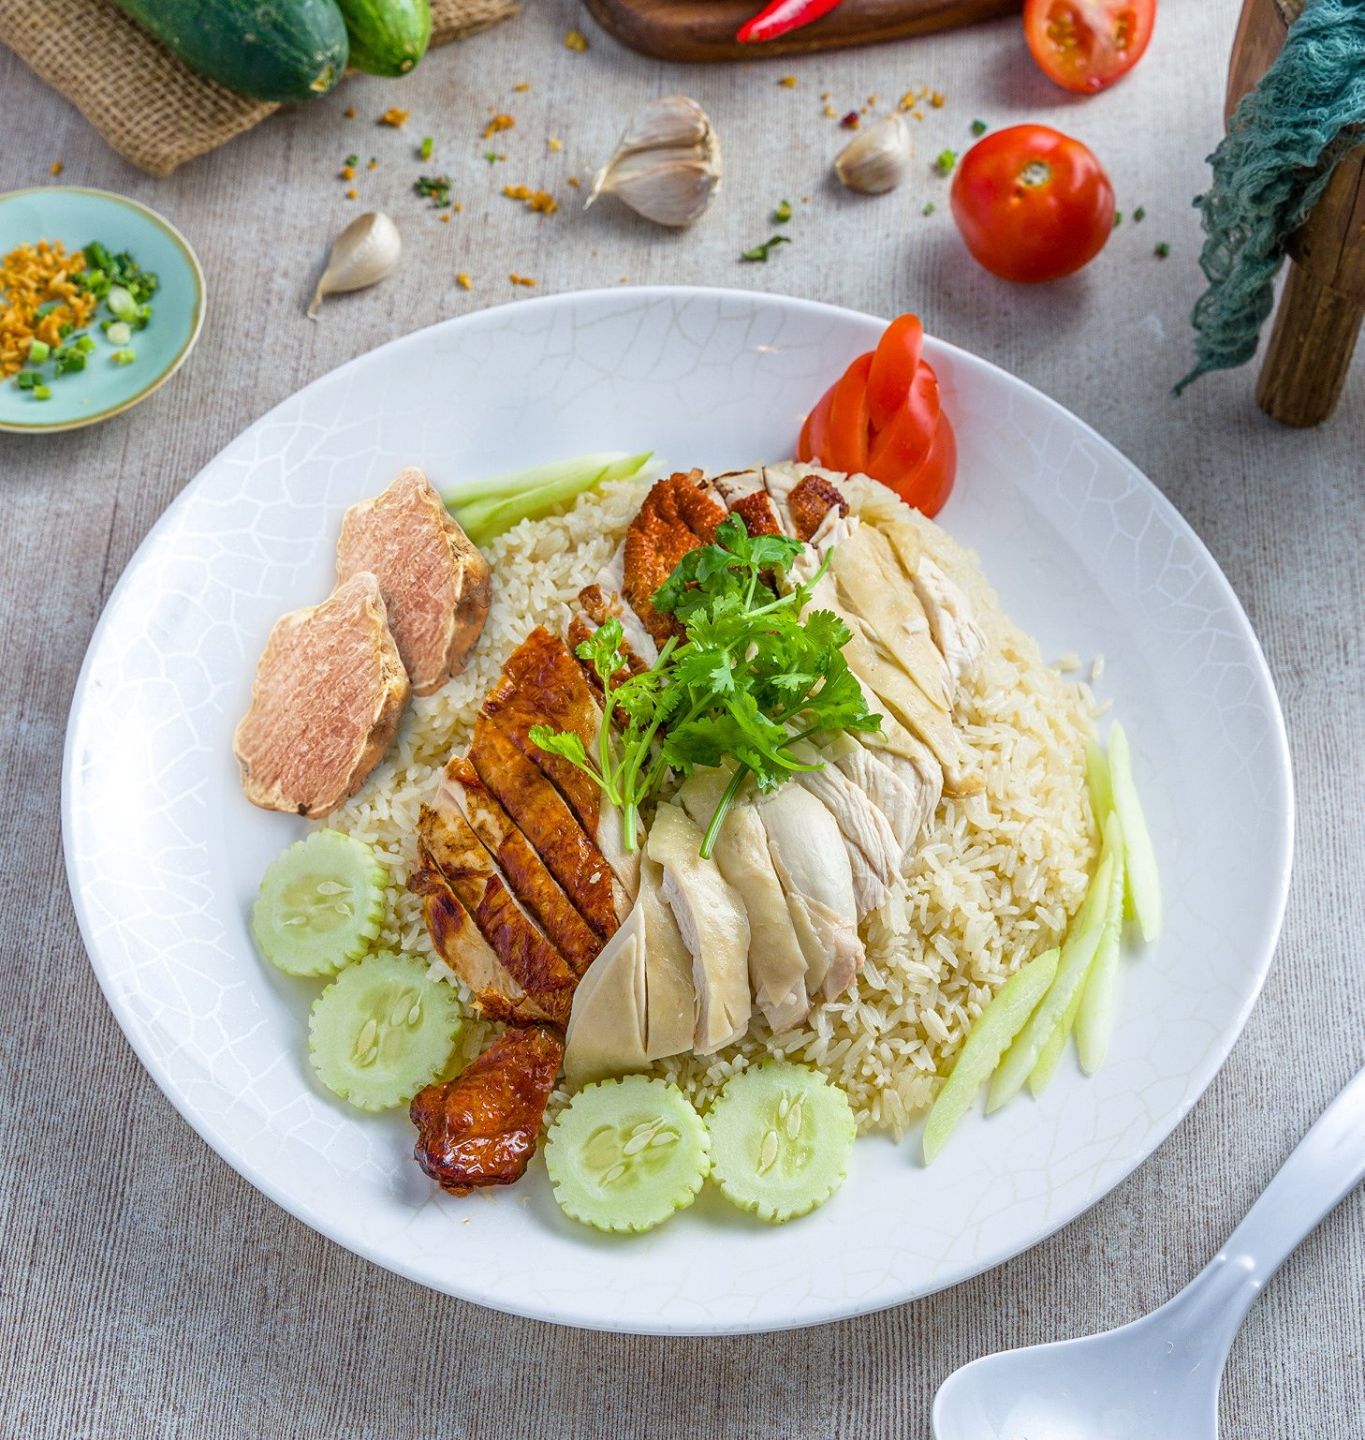 The 21-year-old Chicken Rice brand